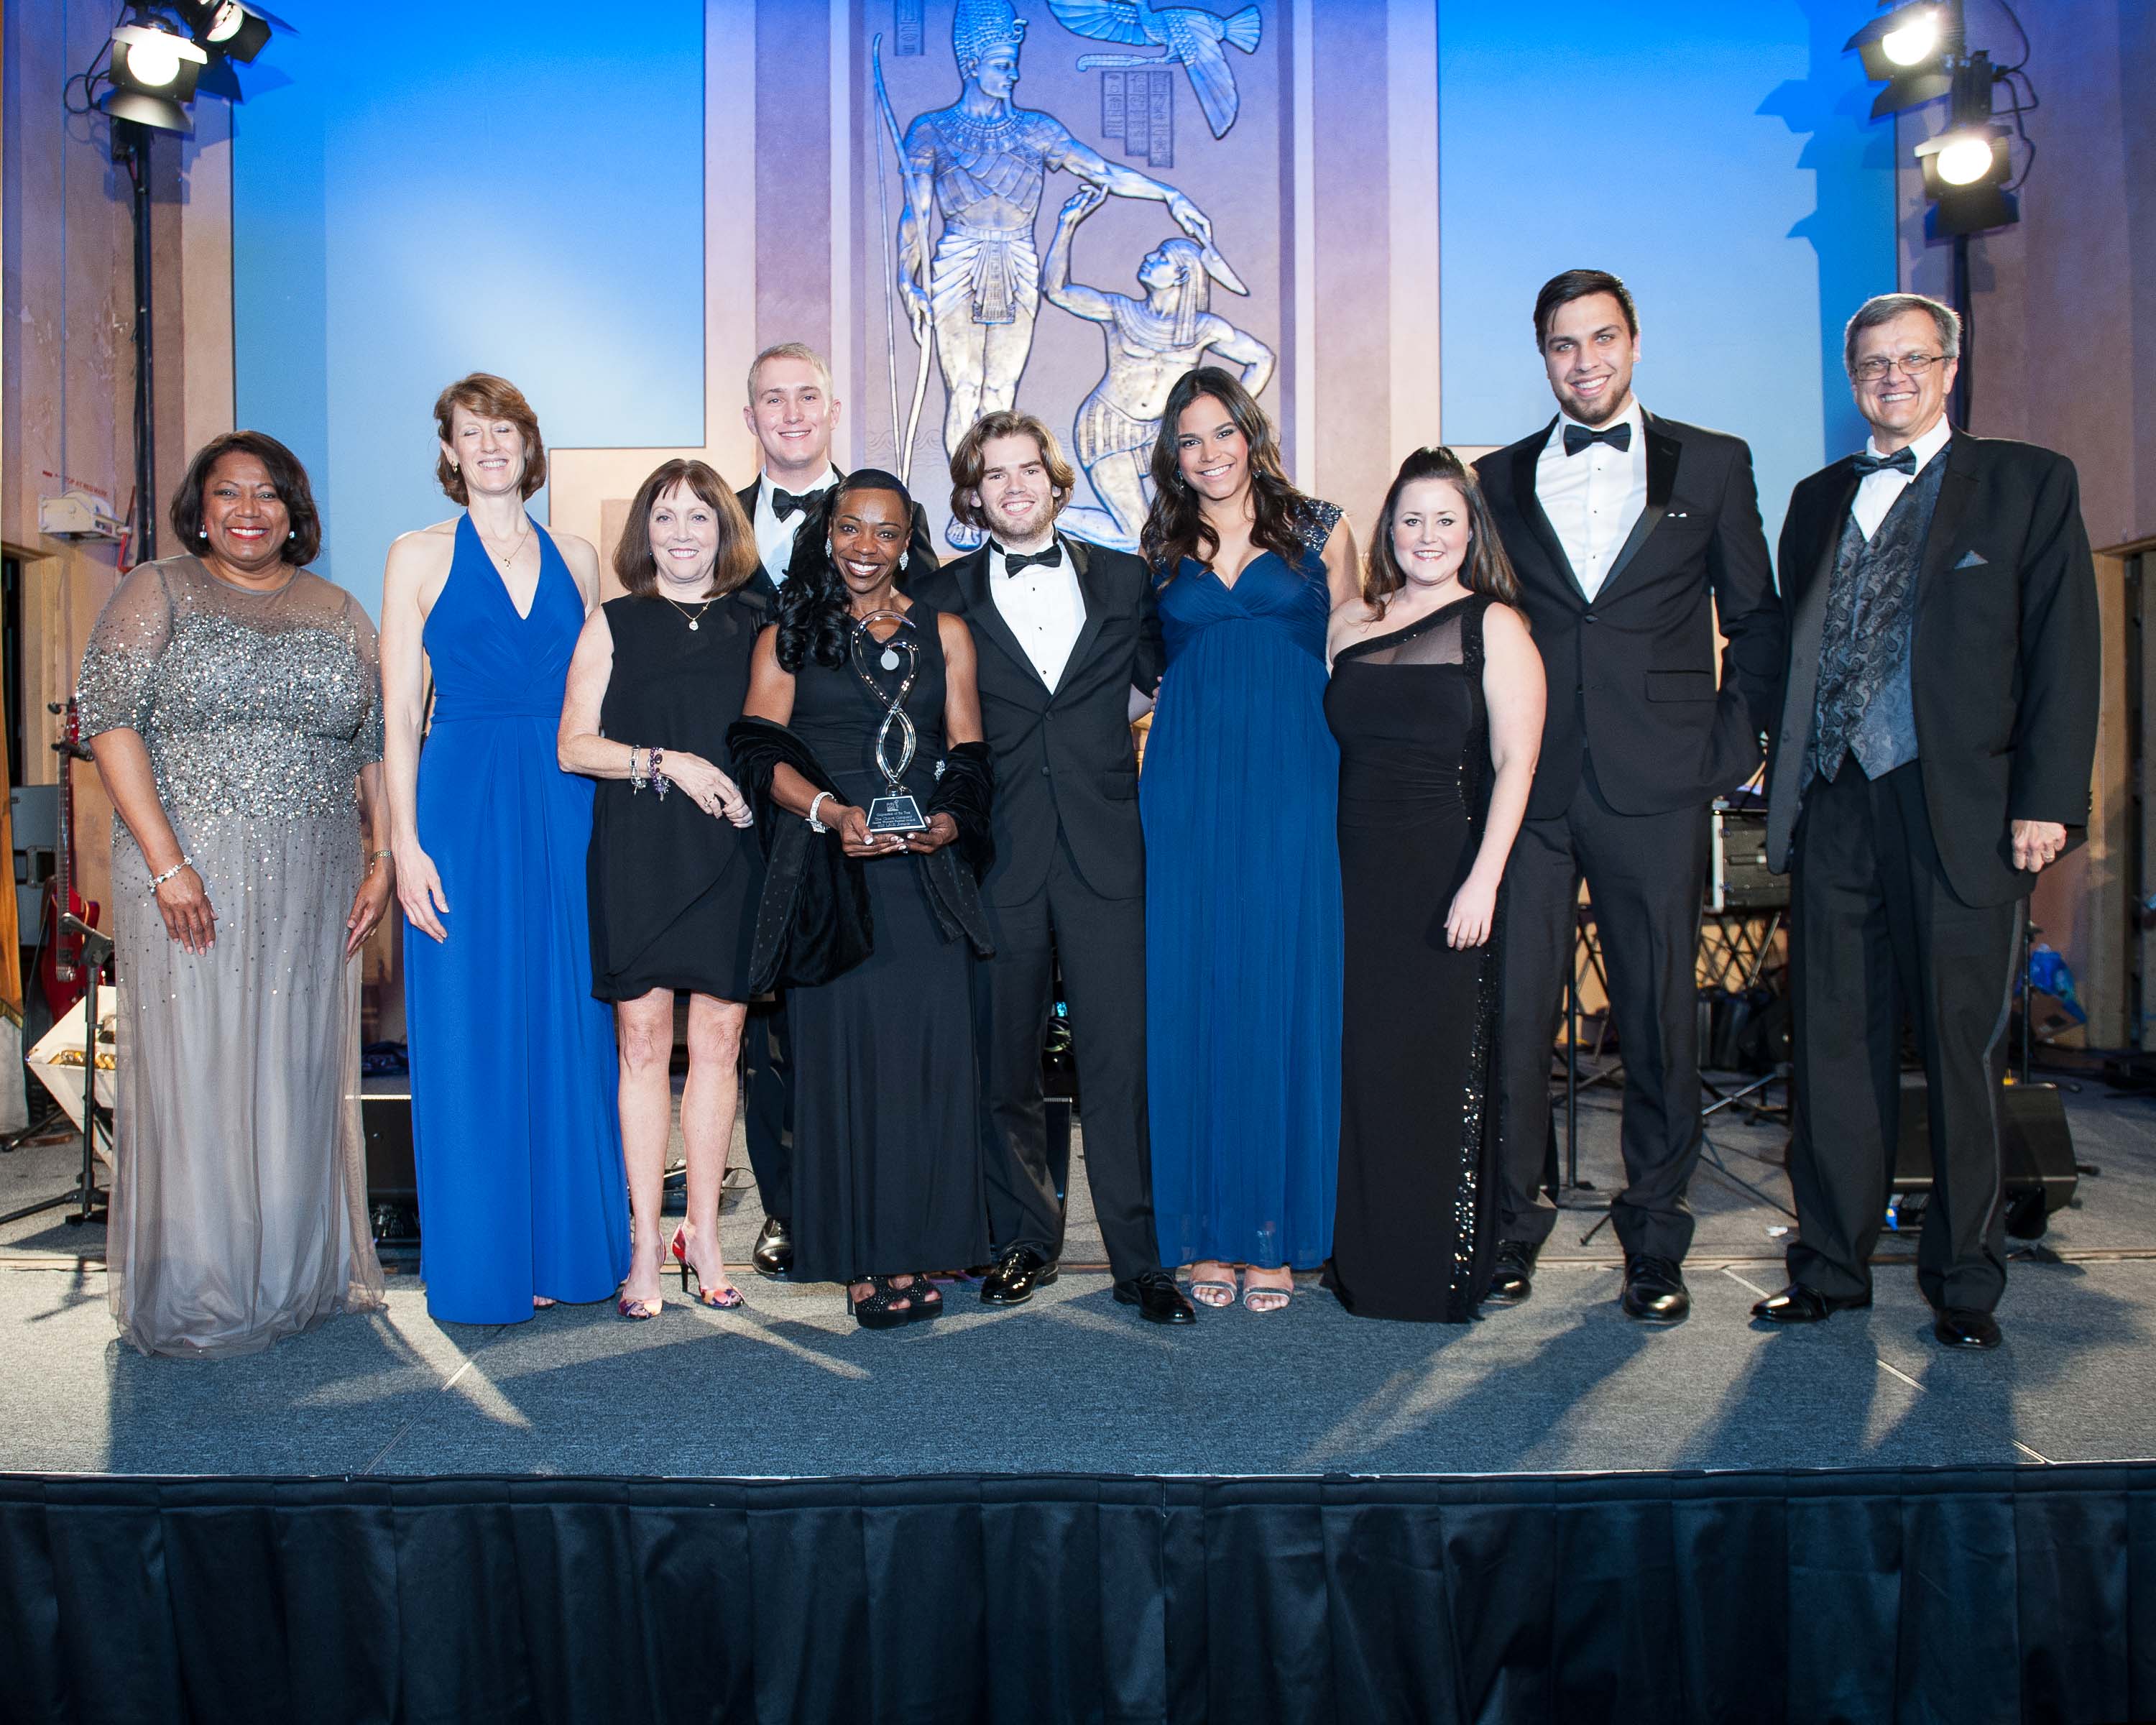 (Center) Dwan Armstrong of Clorox Company Accepts GWBC 2015 Corporation of the Year Award